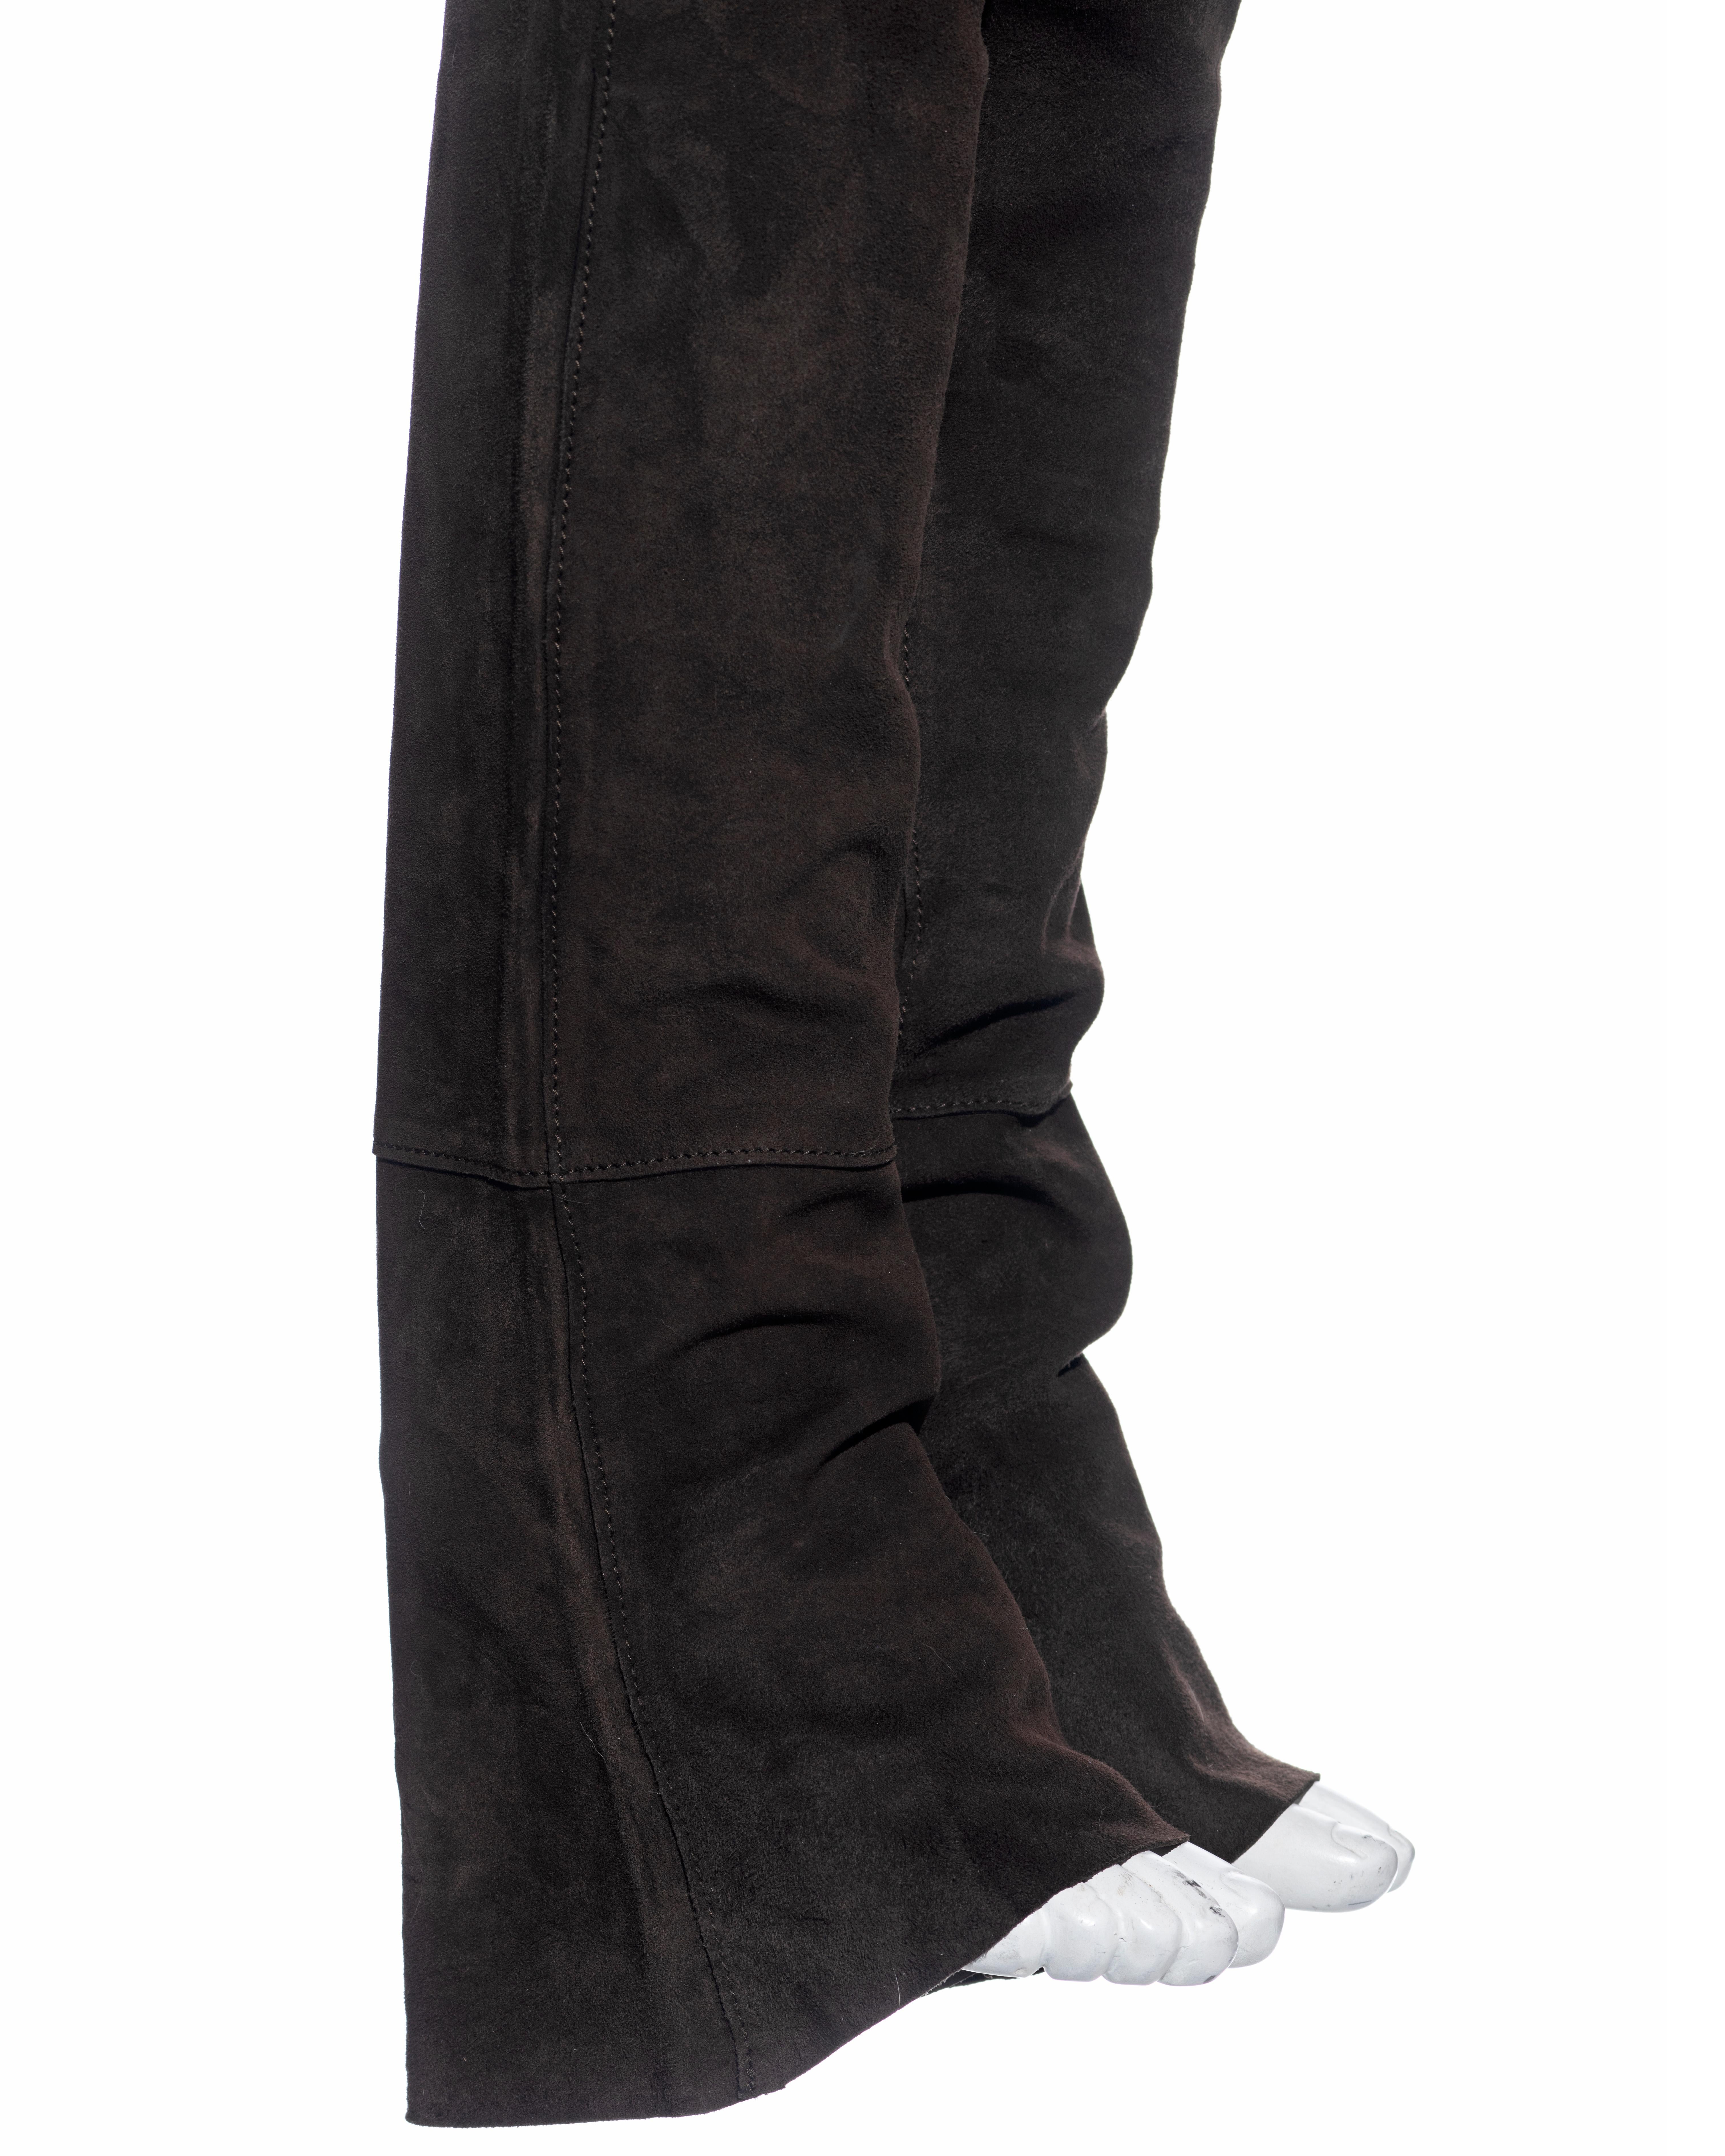 Dolce & Gabbana low rise extra long ruched brown leather pants, fw 2001 1